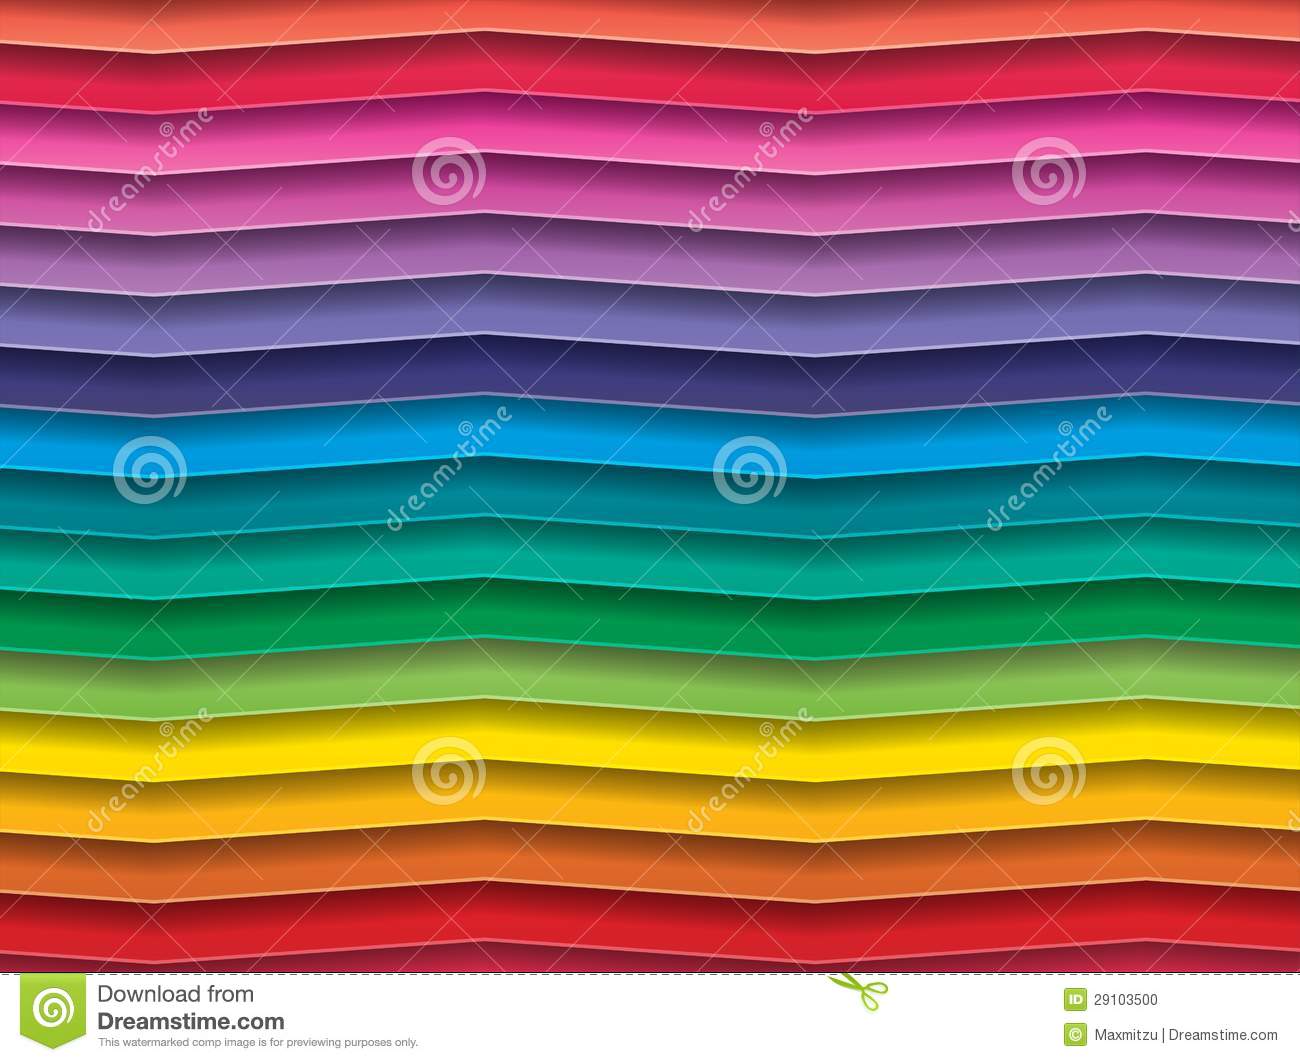 Colorful Background With Horizontal Wave Lines Stock Photo   Image